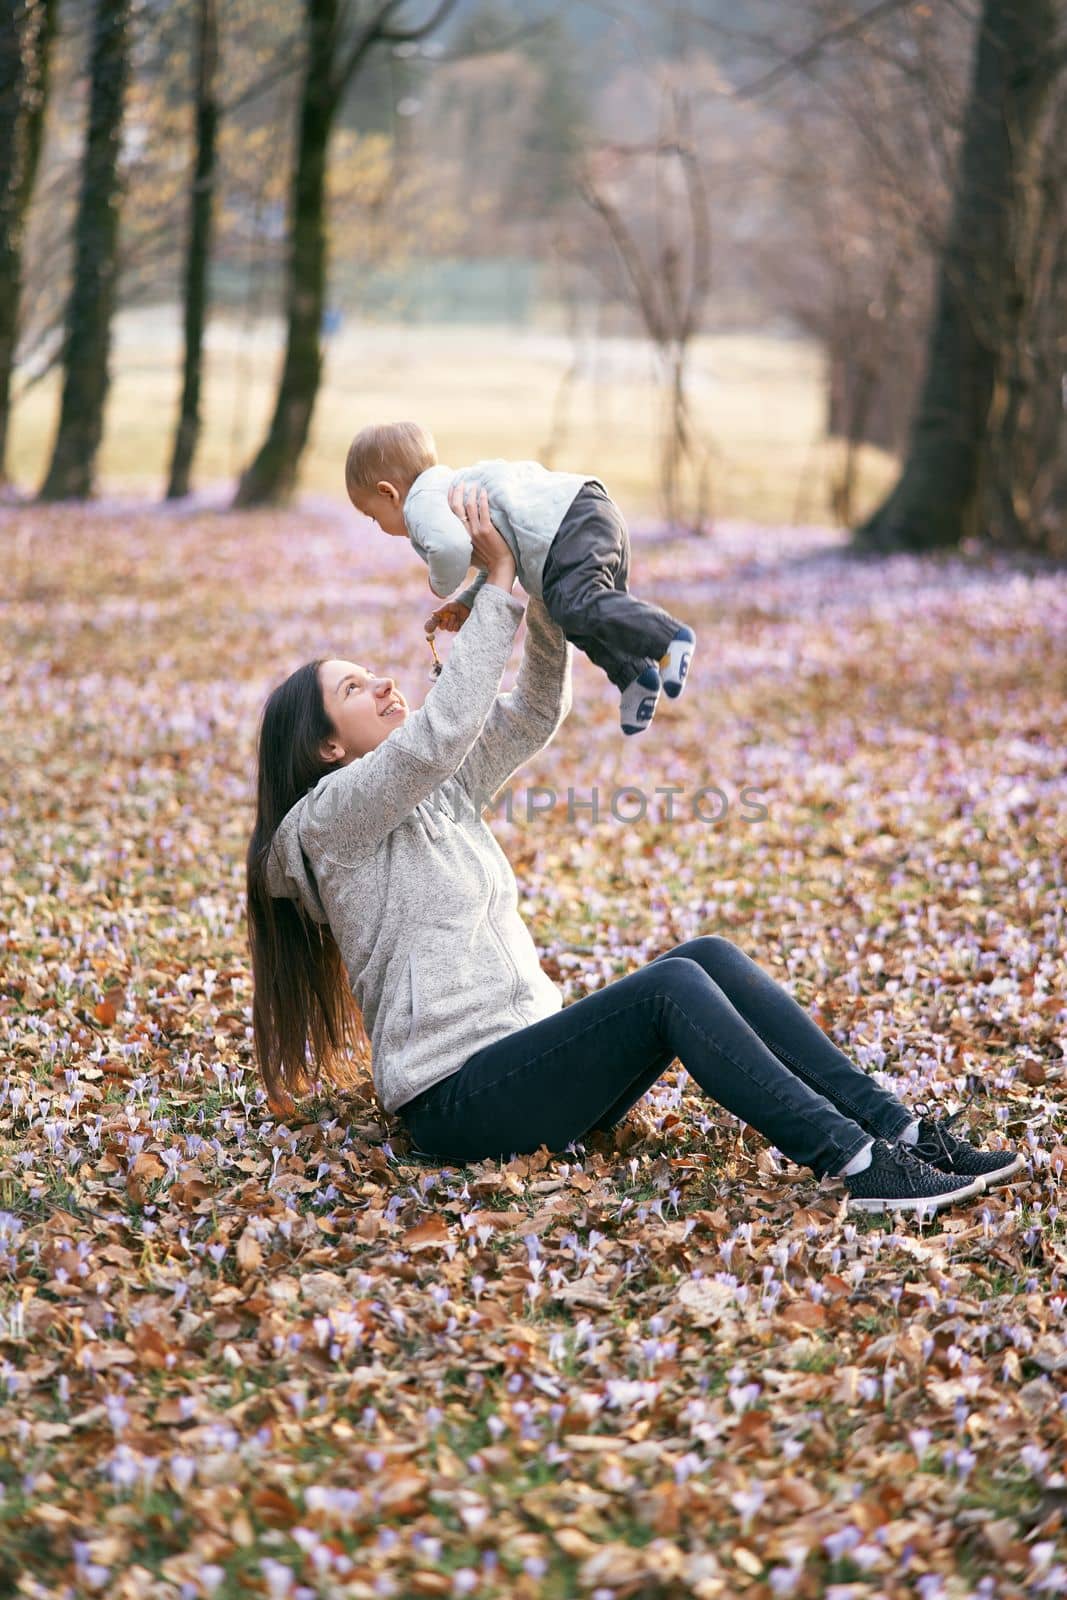 Mom sits on fallen leaves in the park, lifting the baby above her in her arms. High quality photo